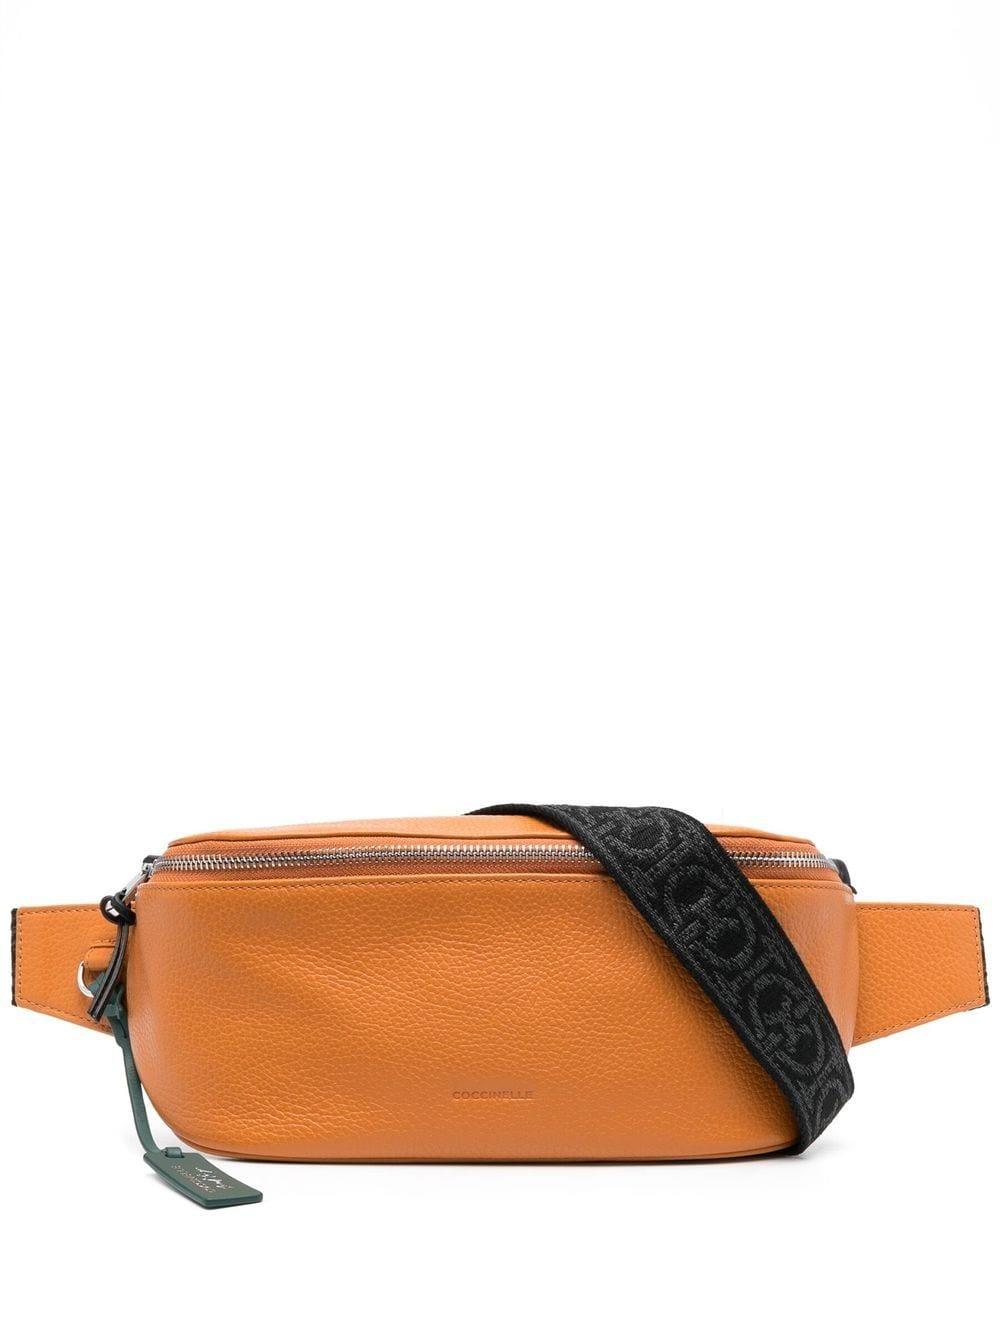 Coccinelle Grained Leather Belt Bag in Orange | Lyst